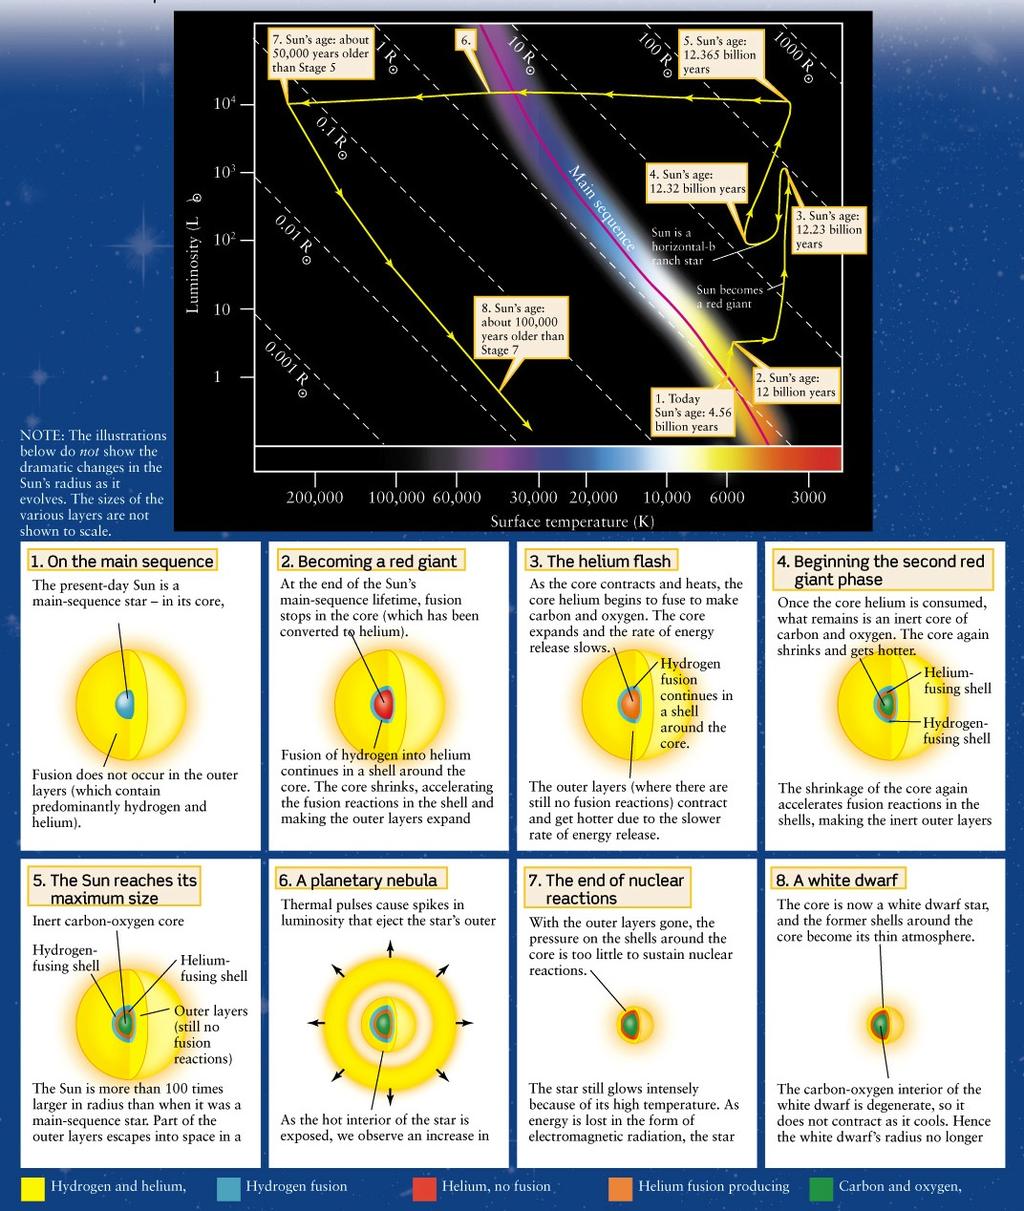 The diagram shows a summary of the life of a solar- type star